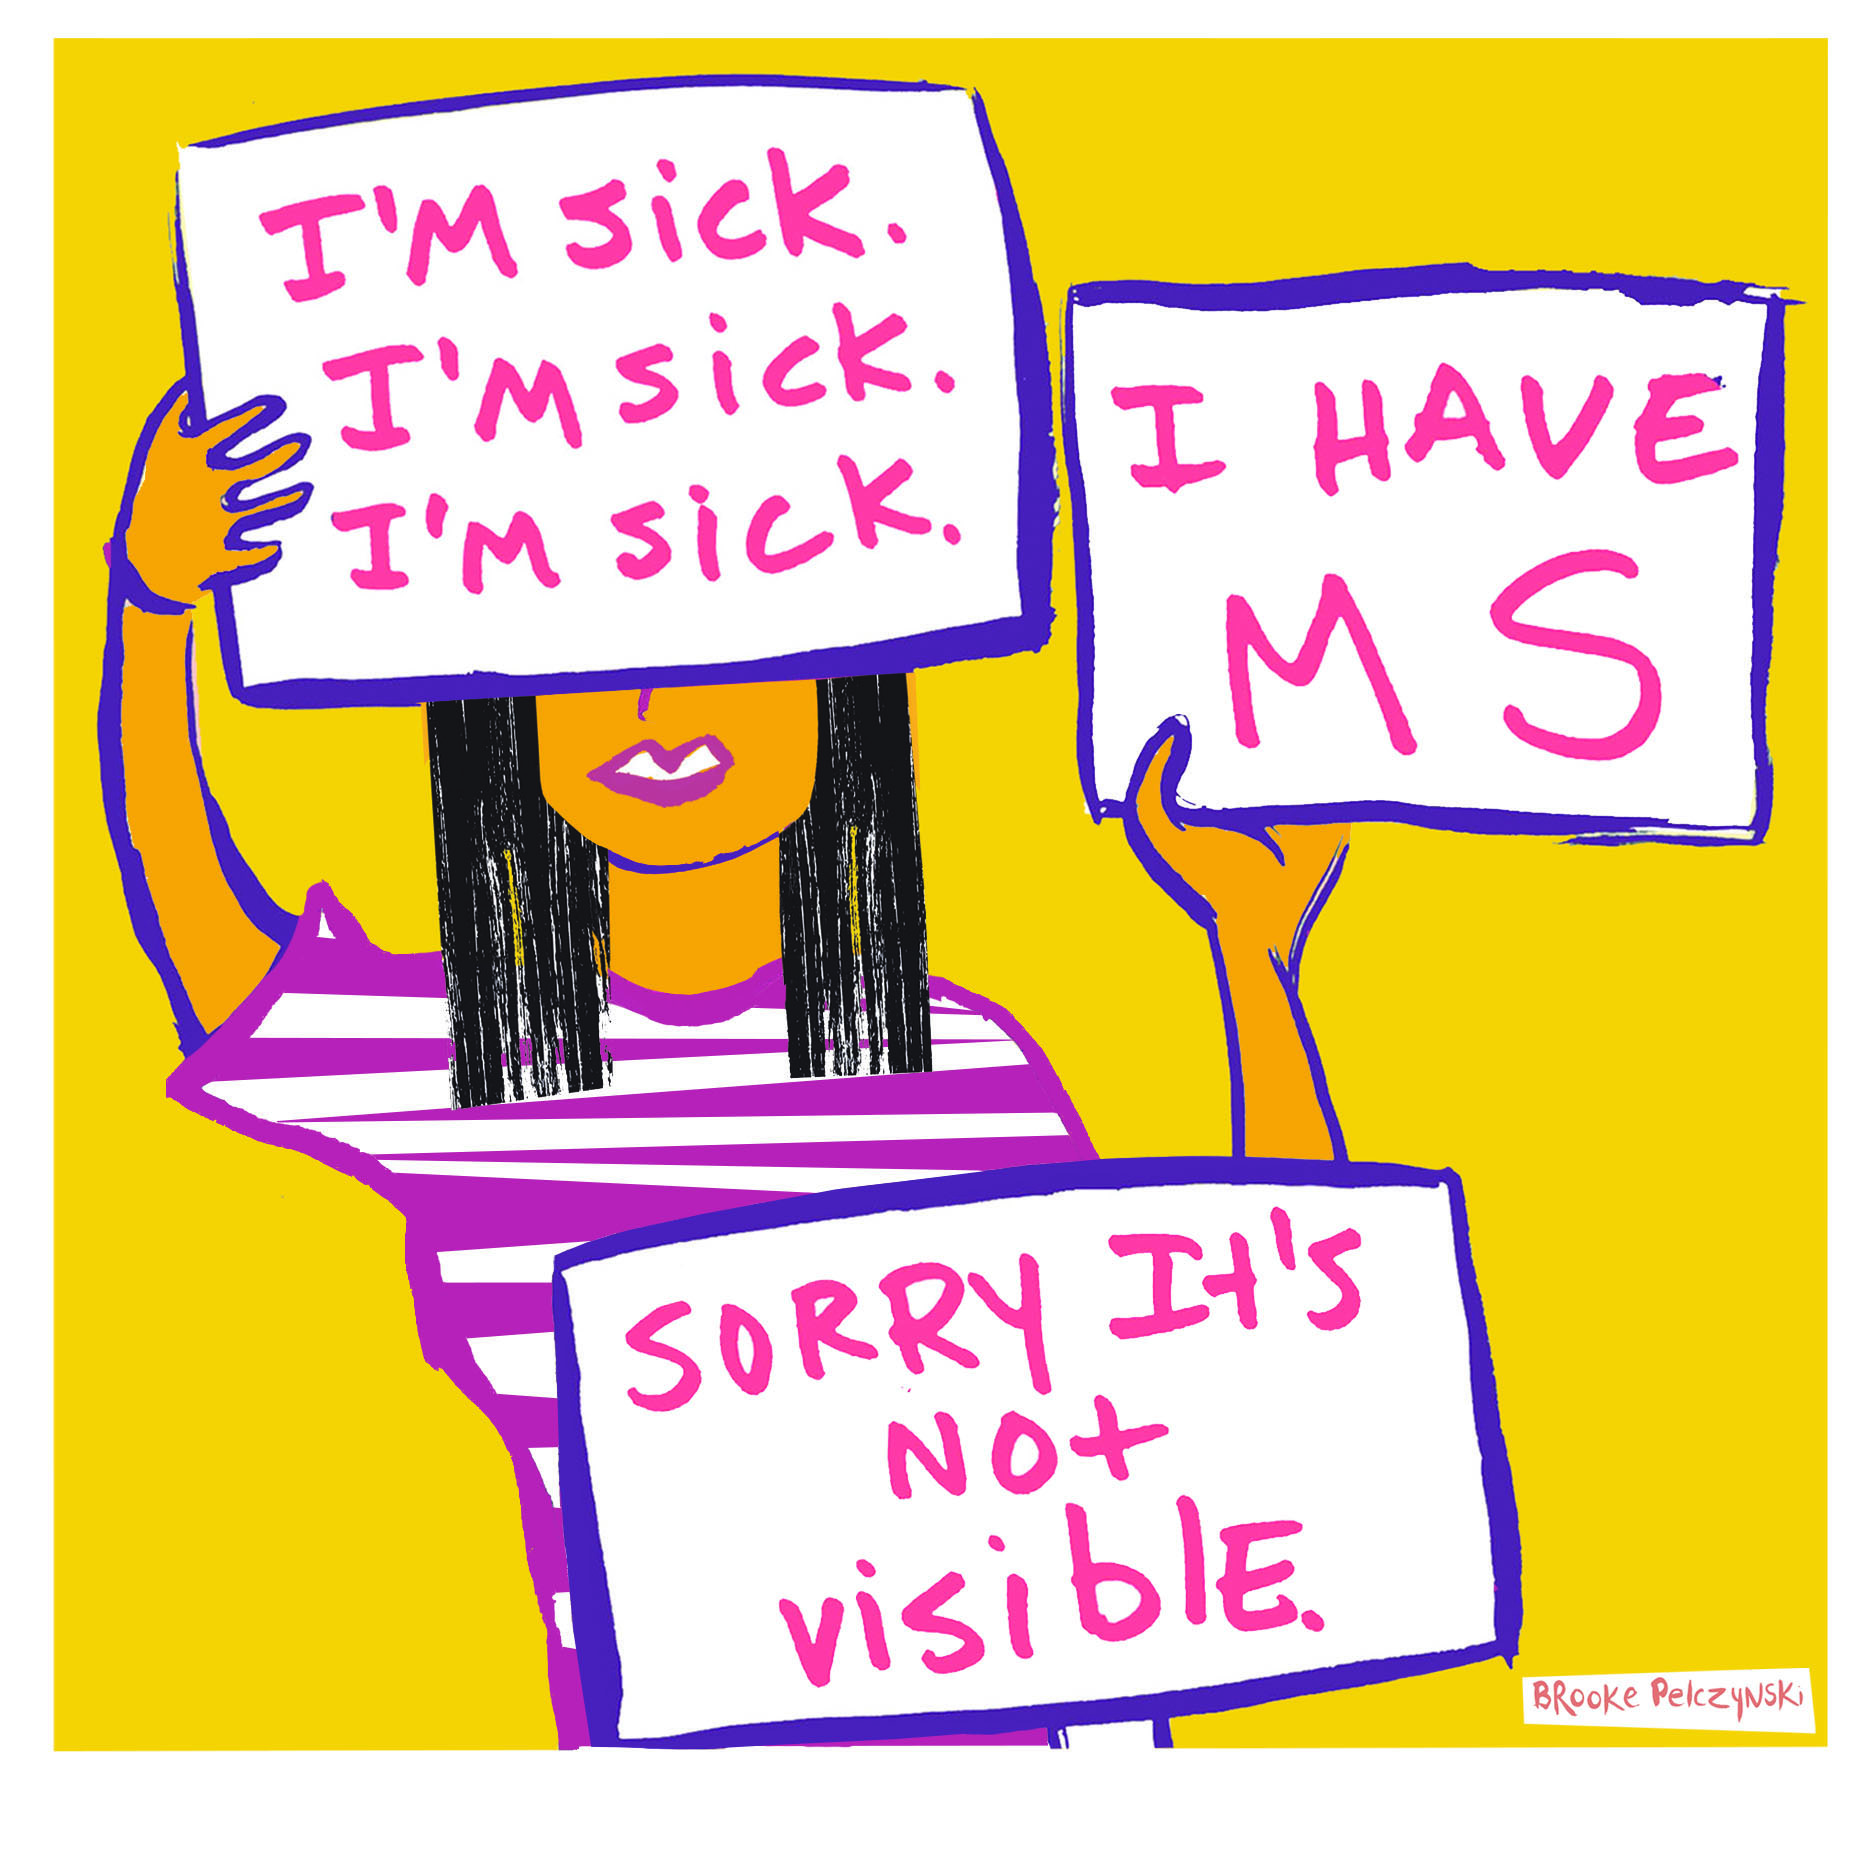 A young girl carries signs that say she has MS, sorry it's not visible.